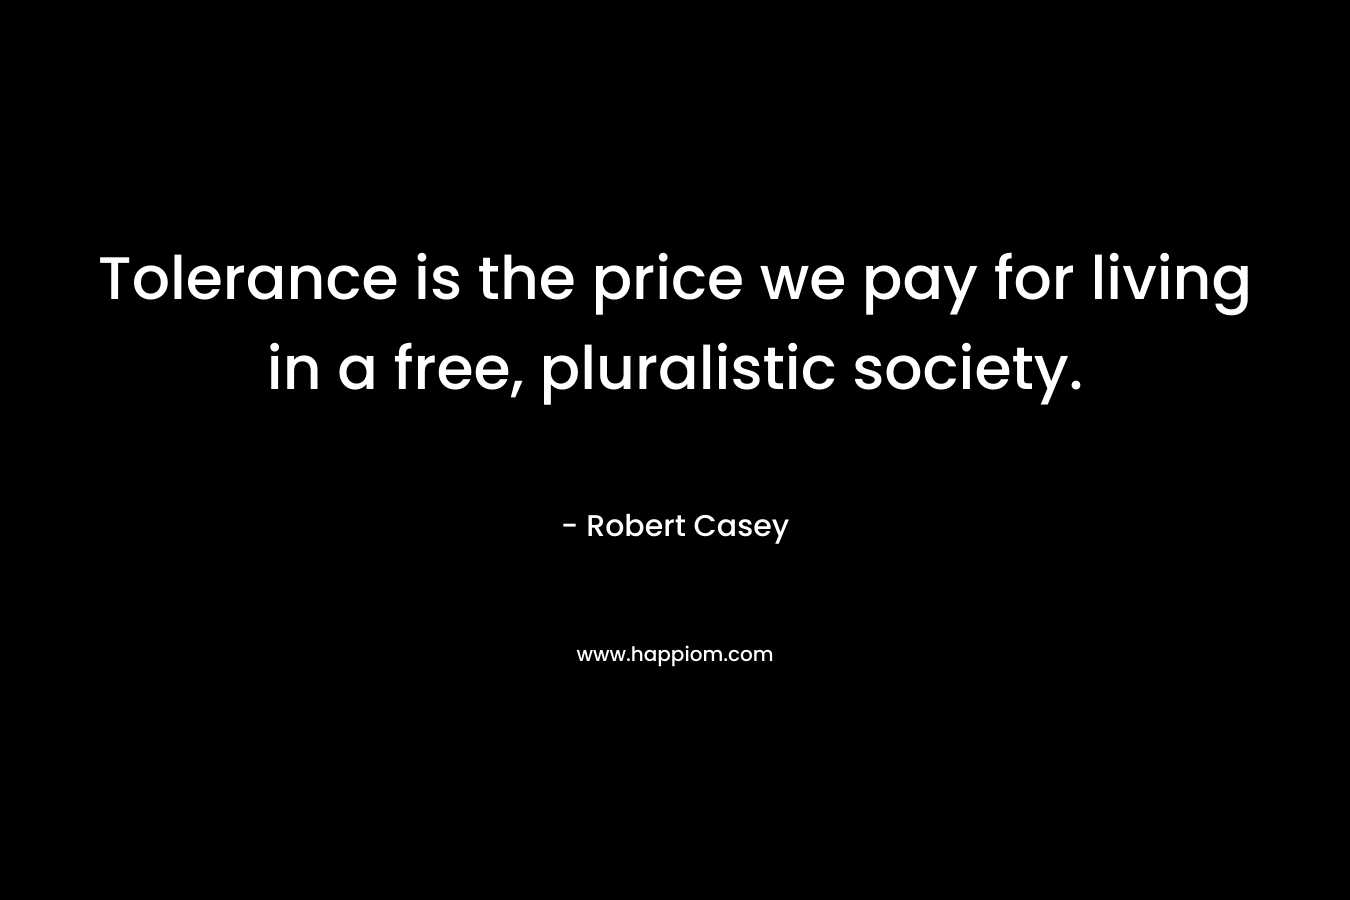 Tolerance is the price we pay for living in a free, pluralistic society.